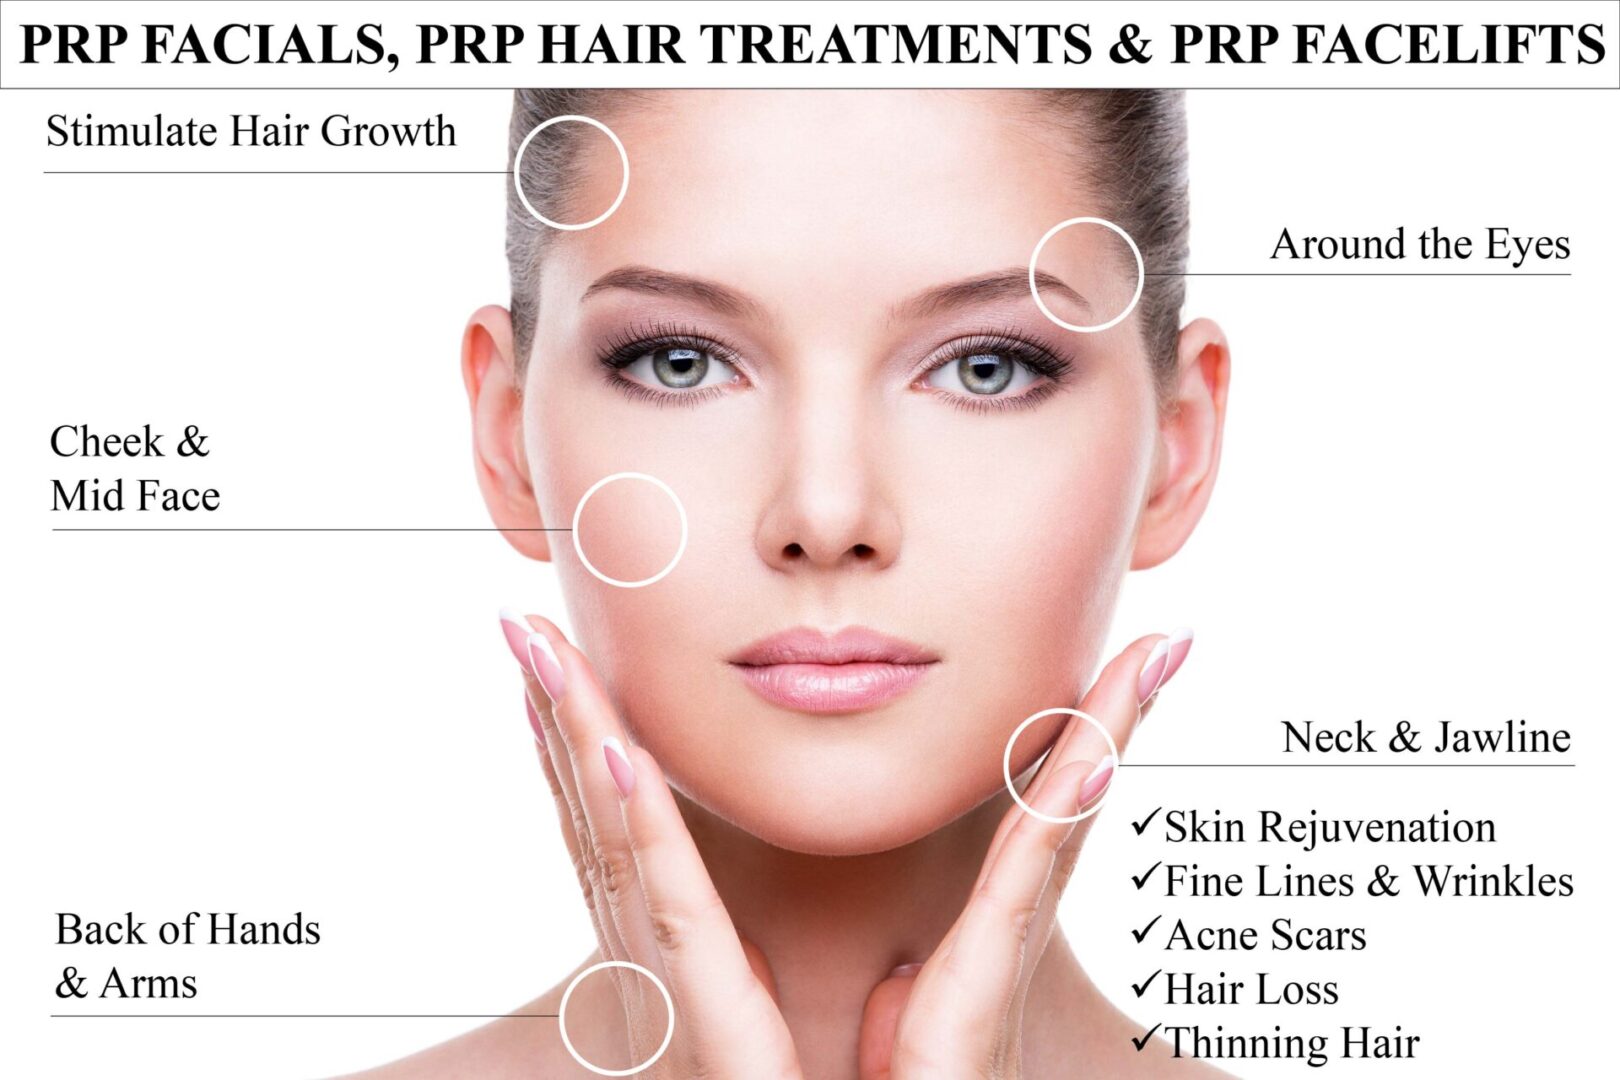 A woman with her hands on her face and the words for hair treatments, prp facials, skin rejuvenation, acne scars, wrinkles